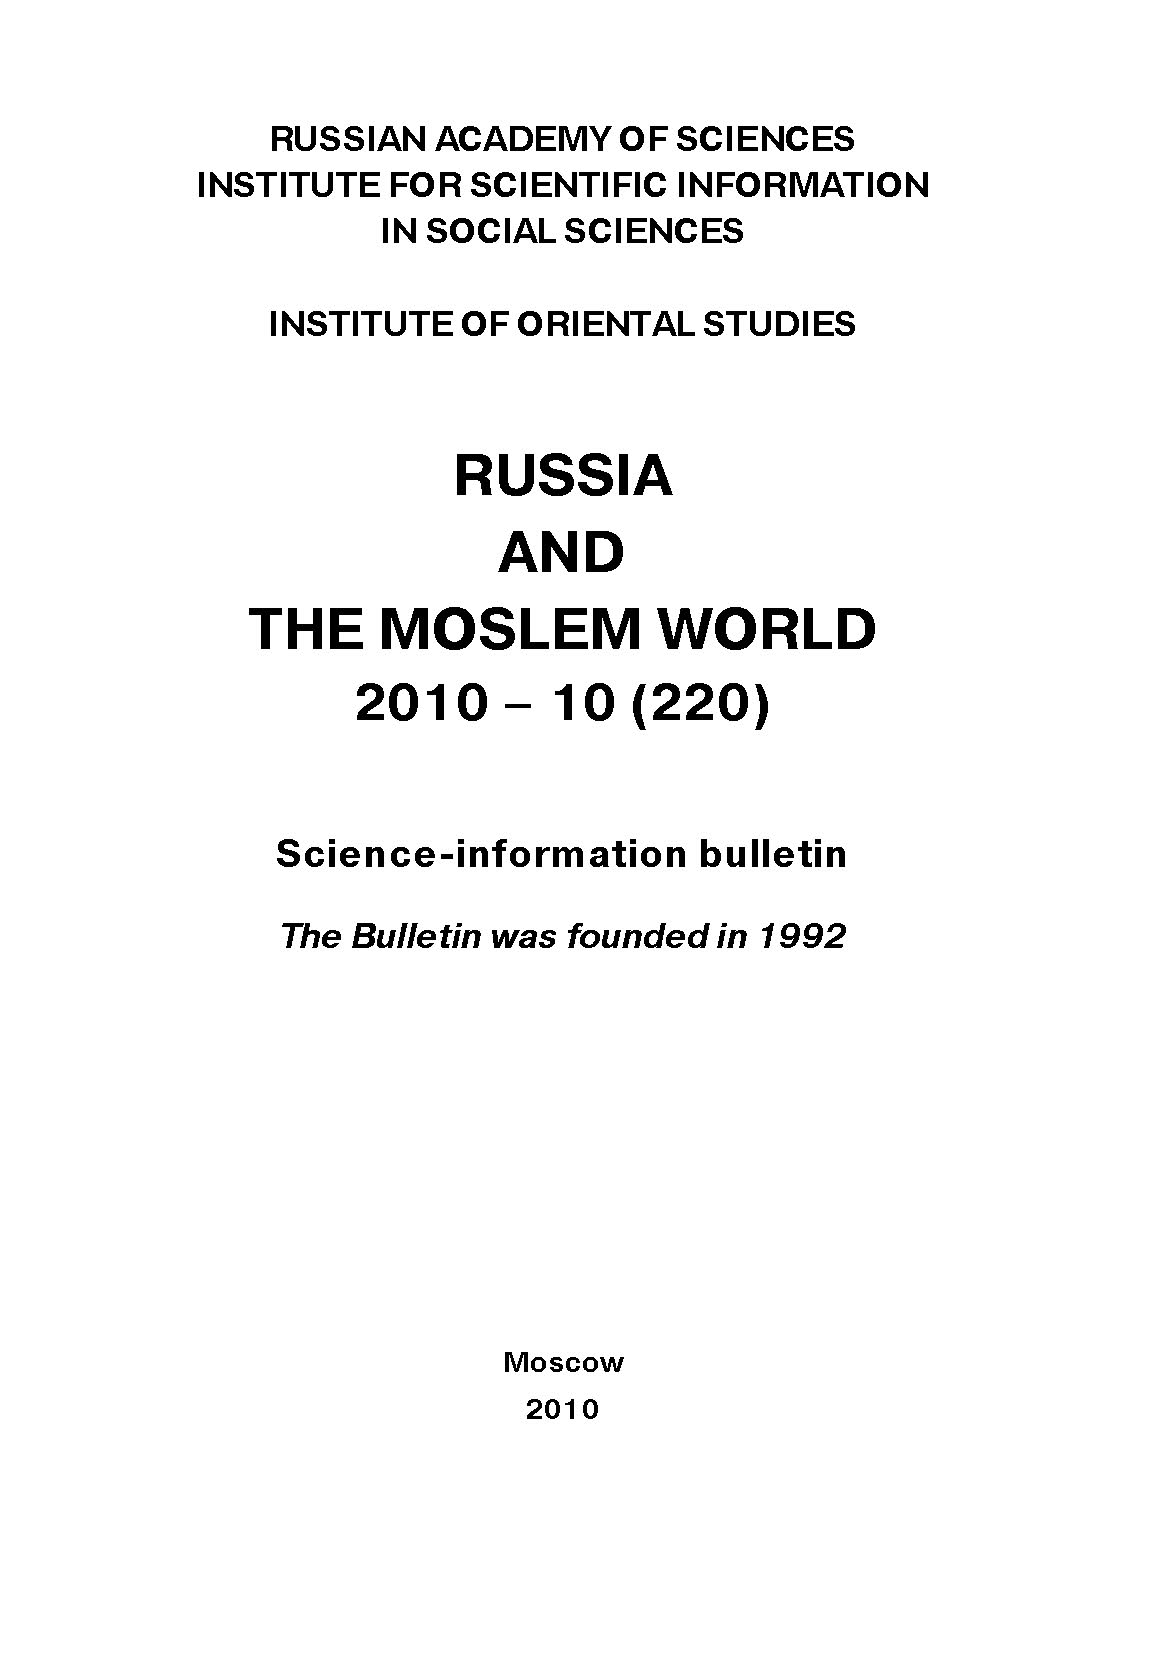 Russia and the Moslem World№ 10 / 2010